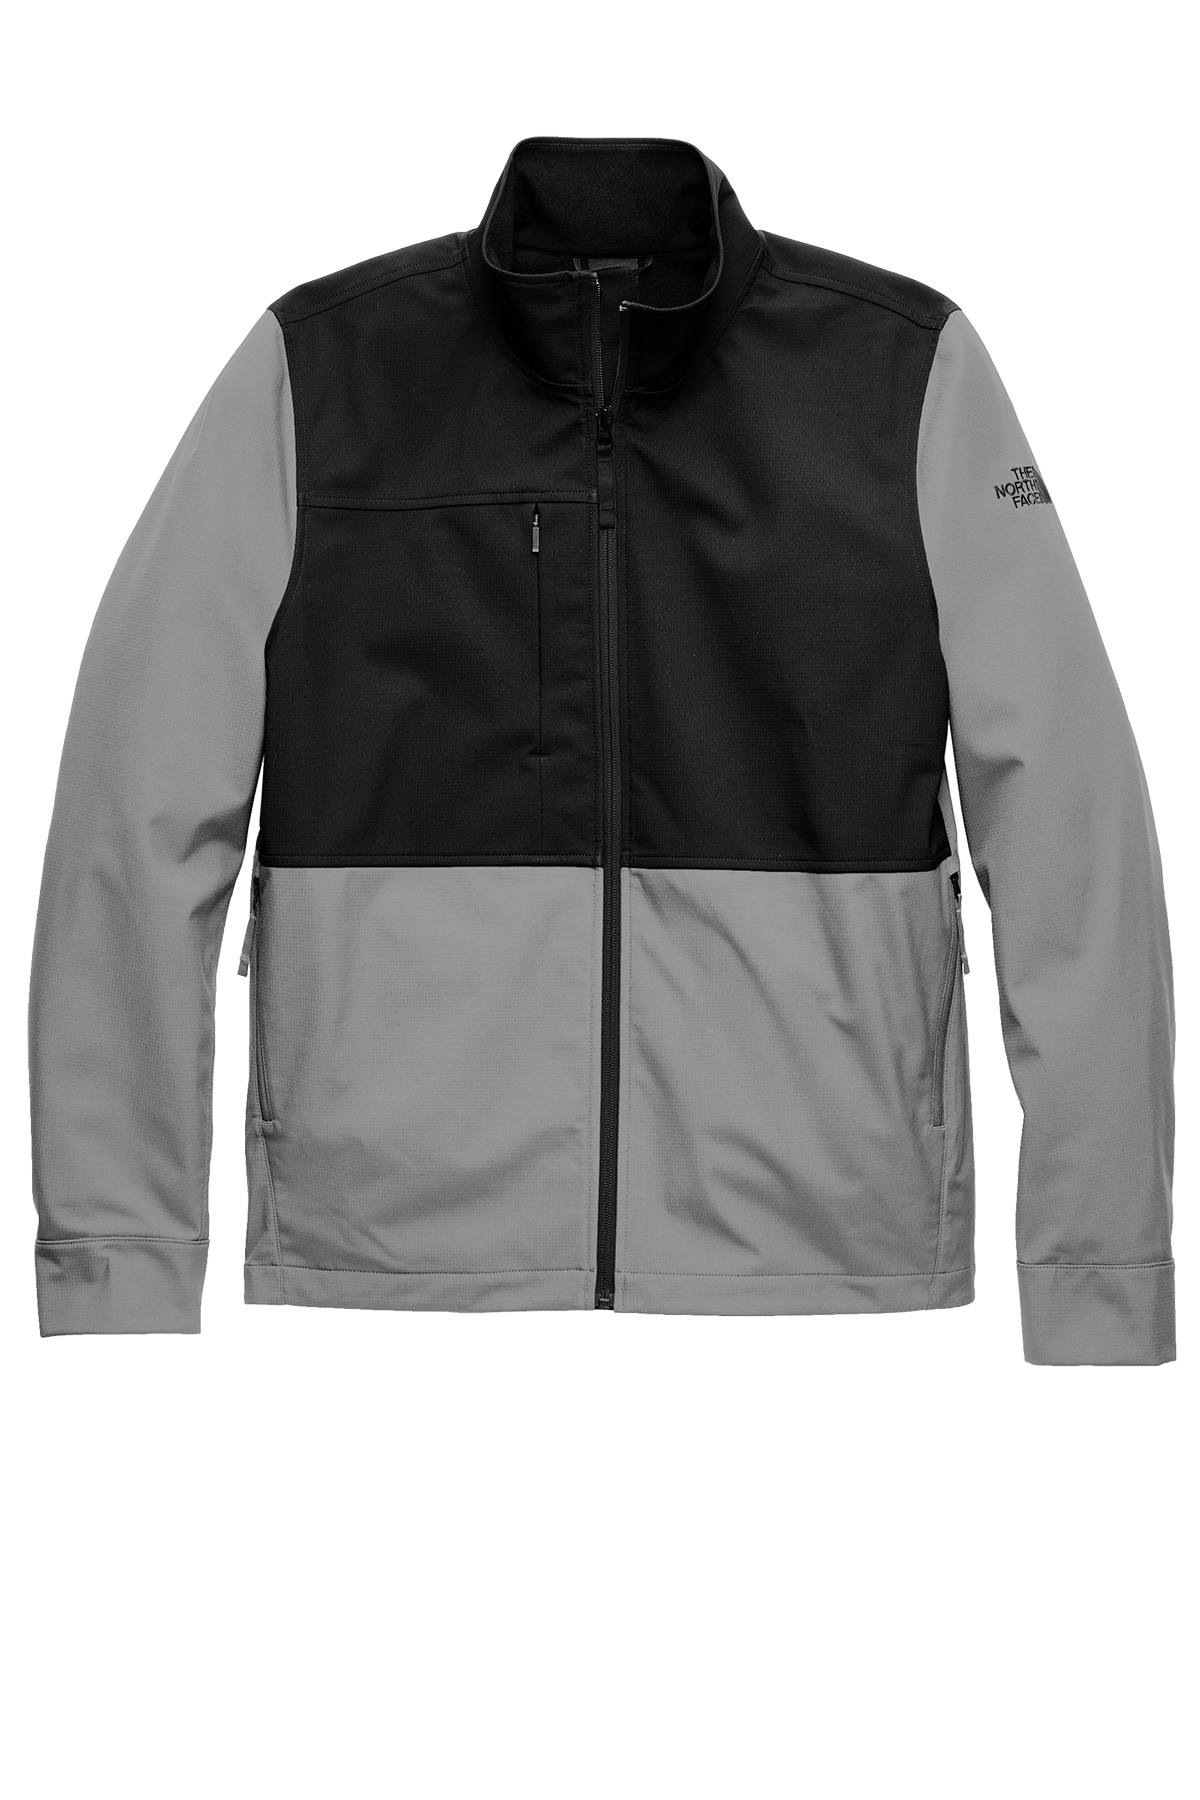 Custom Branded The North Face Branded Jackets & Vests Jackets - Mid Grey